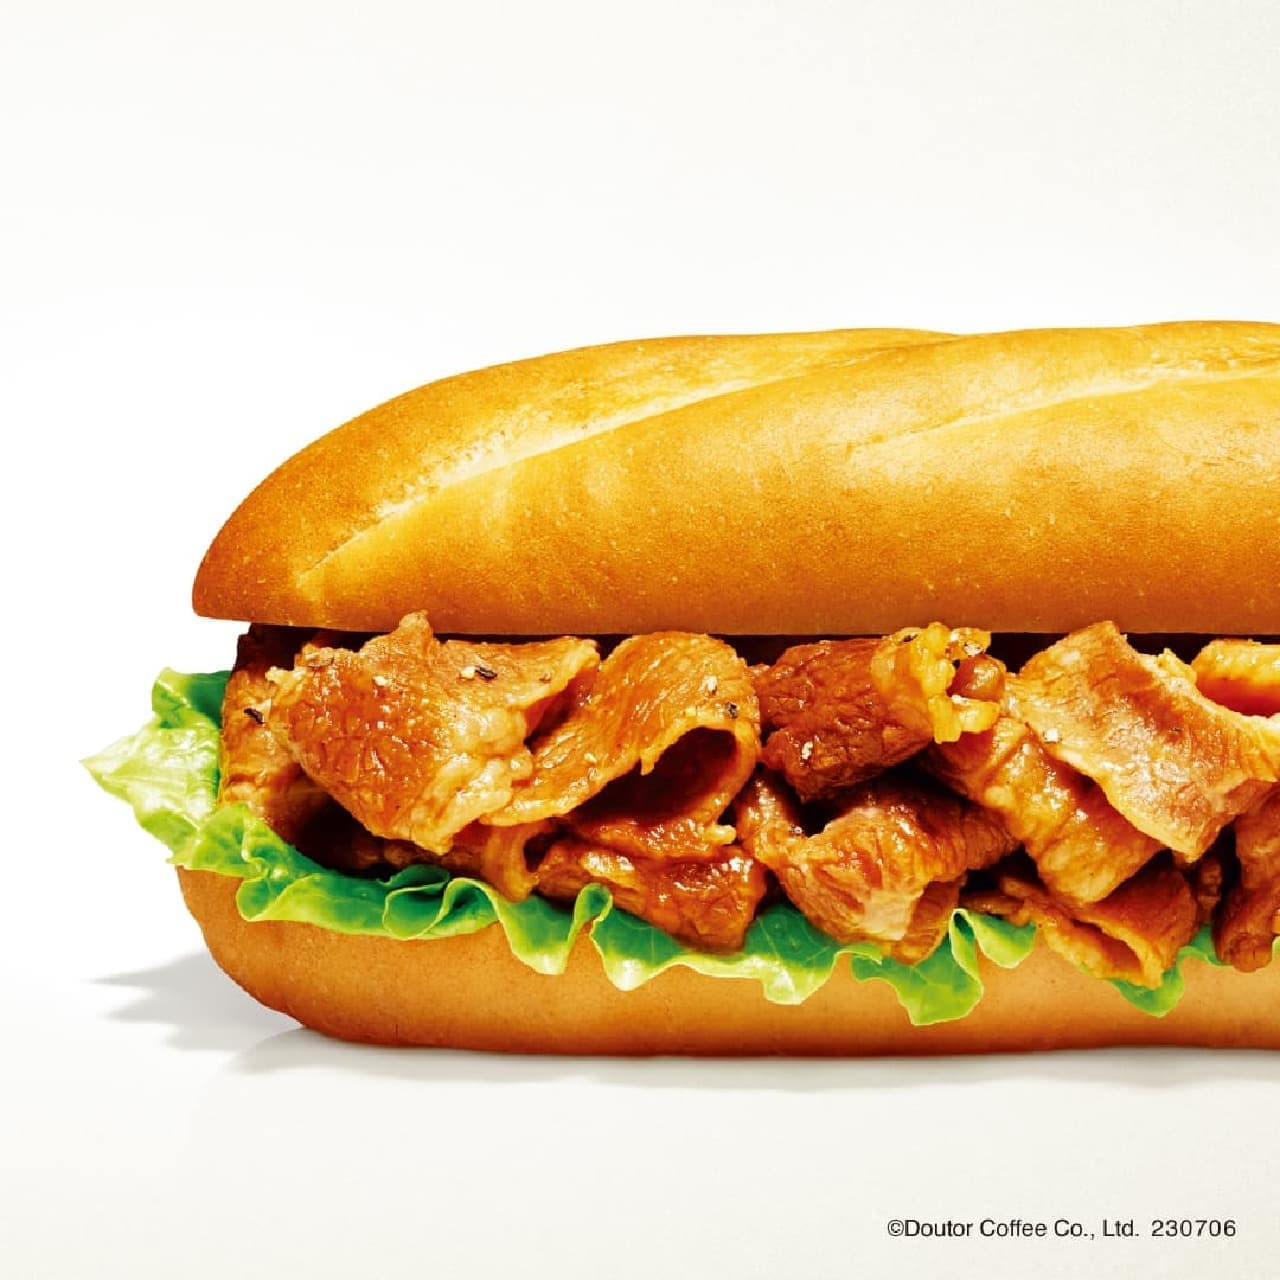 Doutor "Limited Time Milano Sandwich Beef Kalbi".